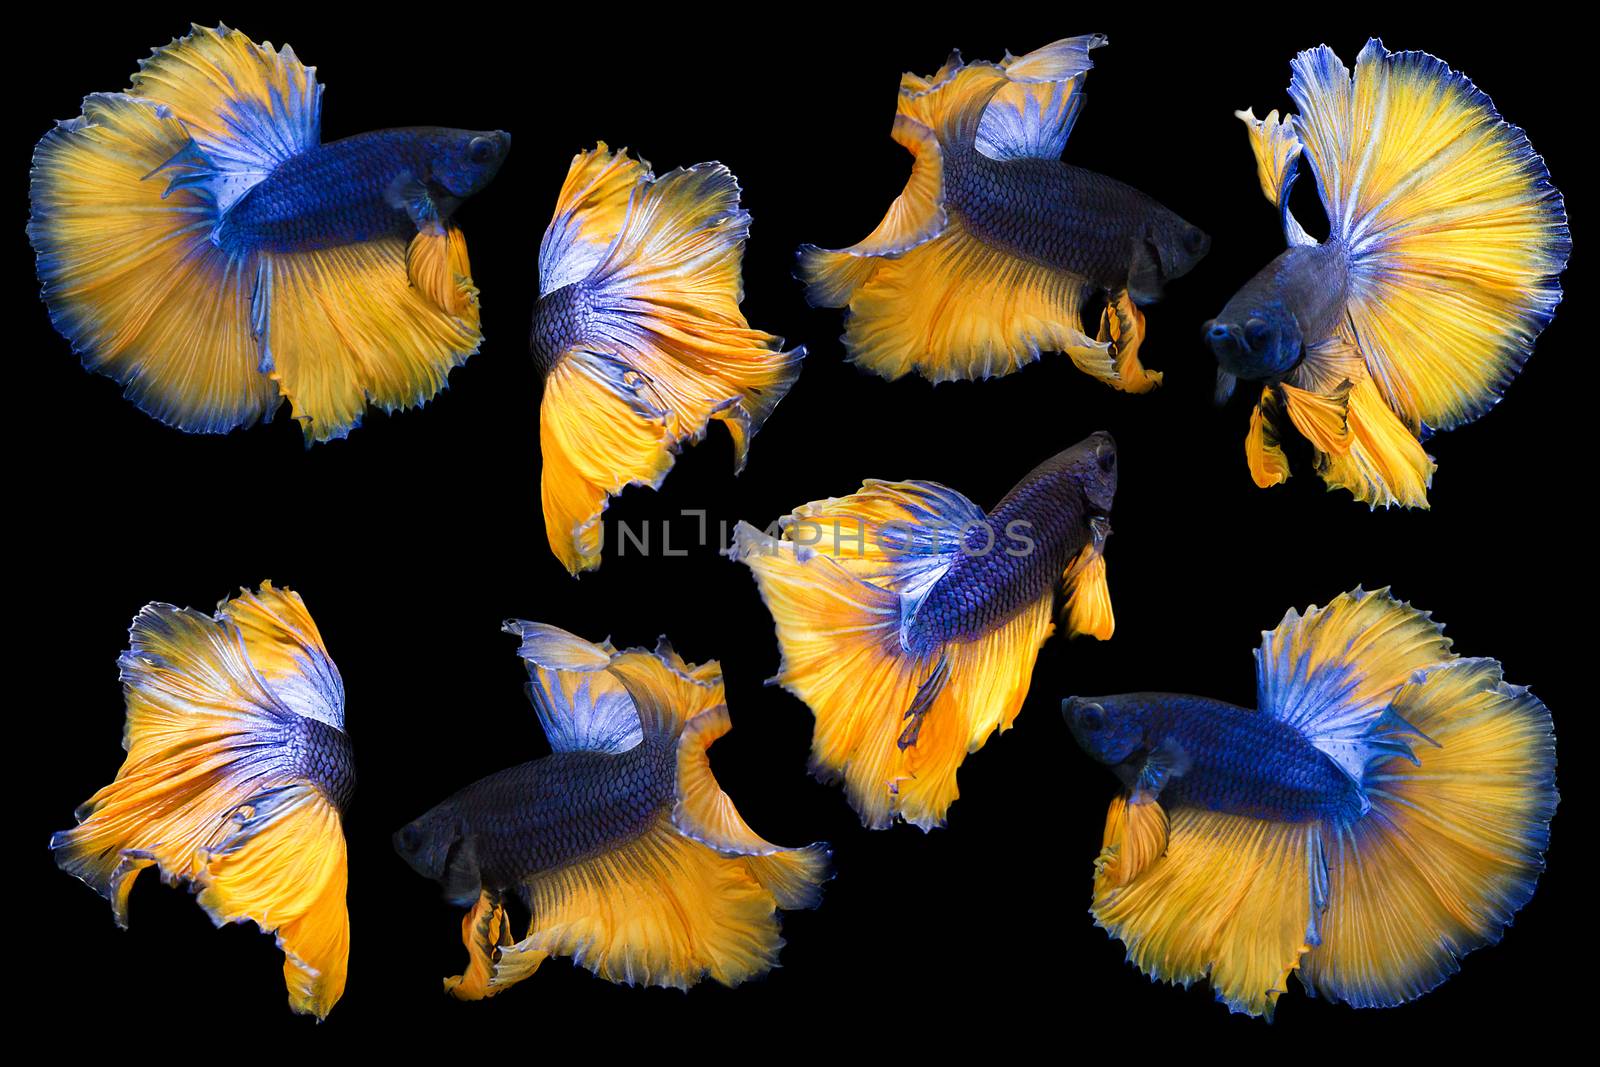 Collection Of Betta Fish Isolated On Black Background, Action Moving Moment Of Mustard Over Half Moon Betta, Siamese Fighting Fish